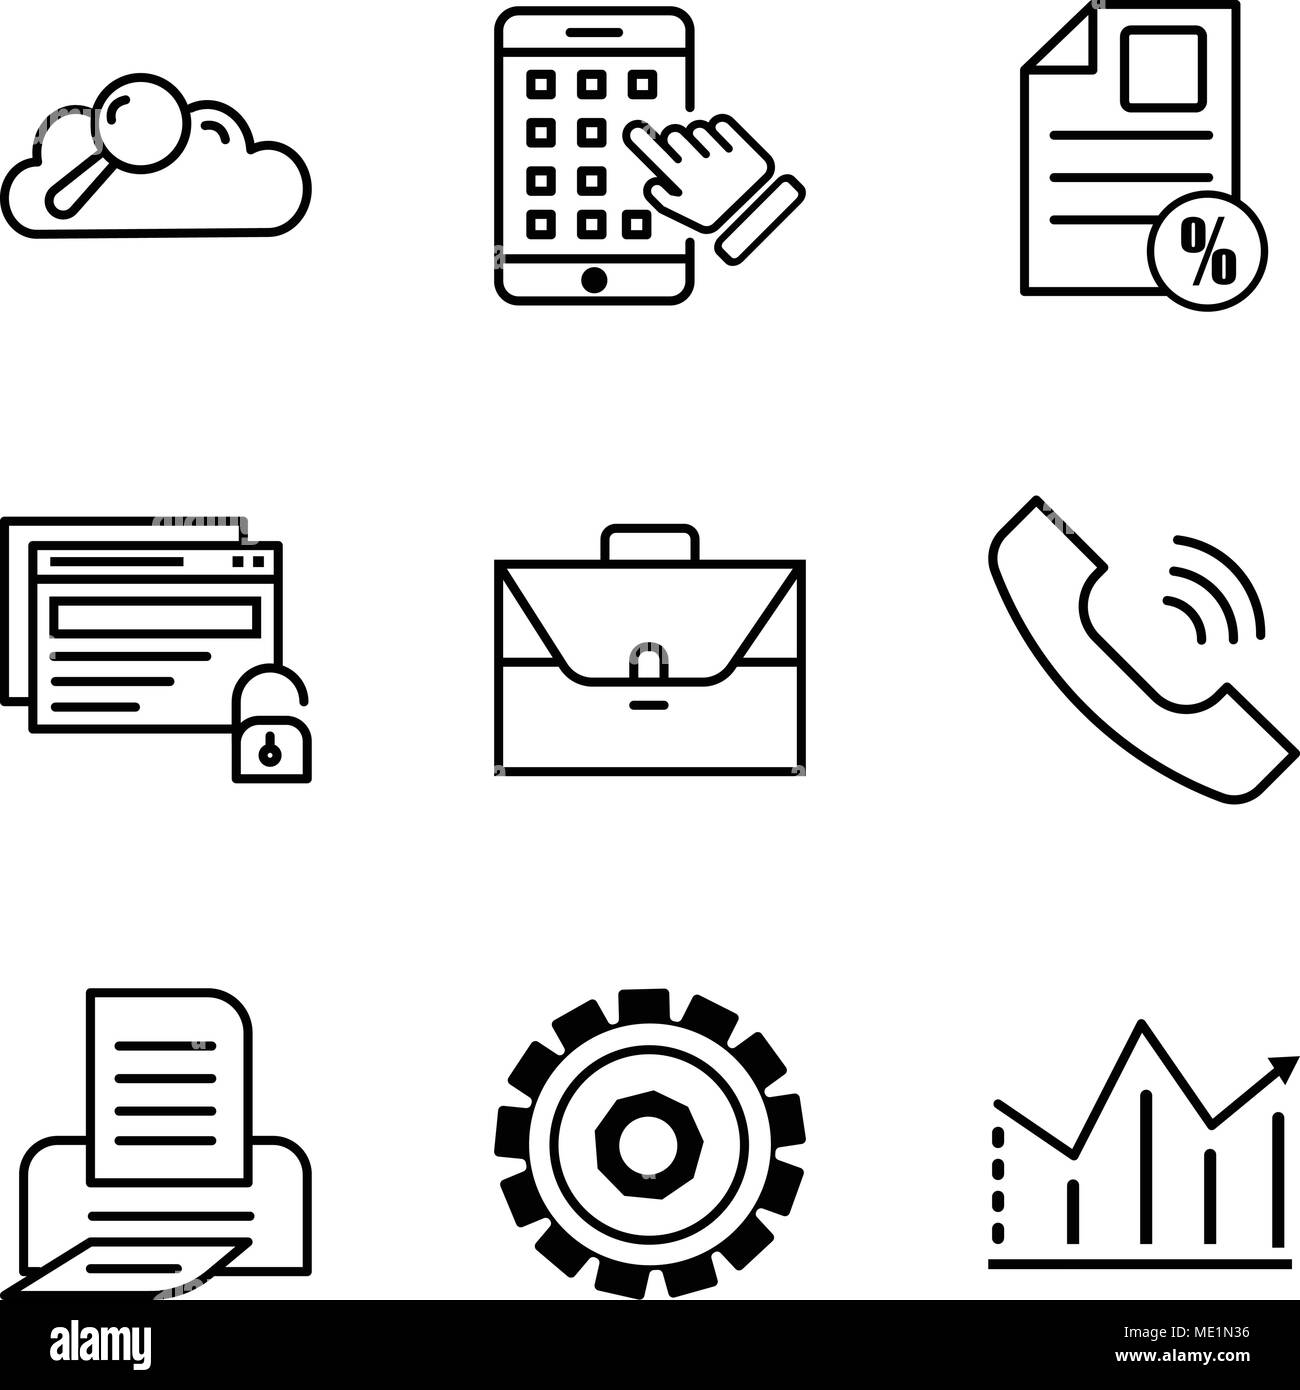 Set Of 9 simple editable icons such as statistic, setting, print, call, portfolio, unlock, document percent, iphone, Search data, can be used for mobi Stock Vector